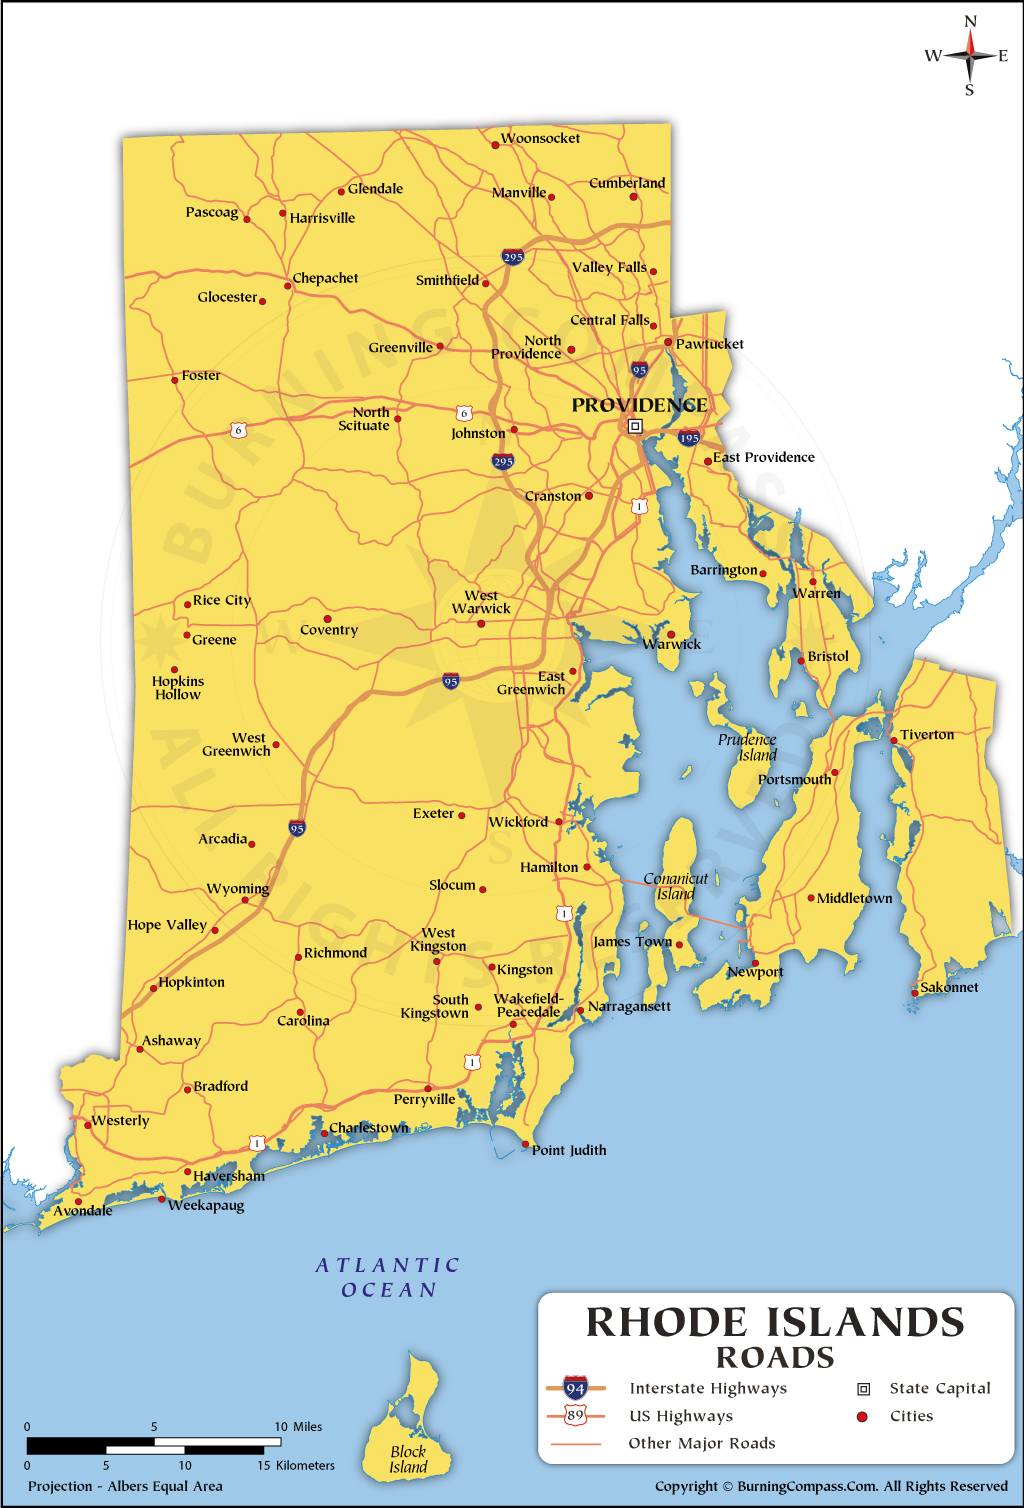 Rhode Island Road Map with Interstate Highways and US Highways